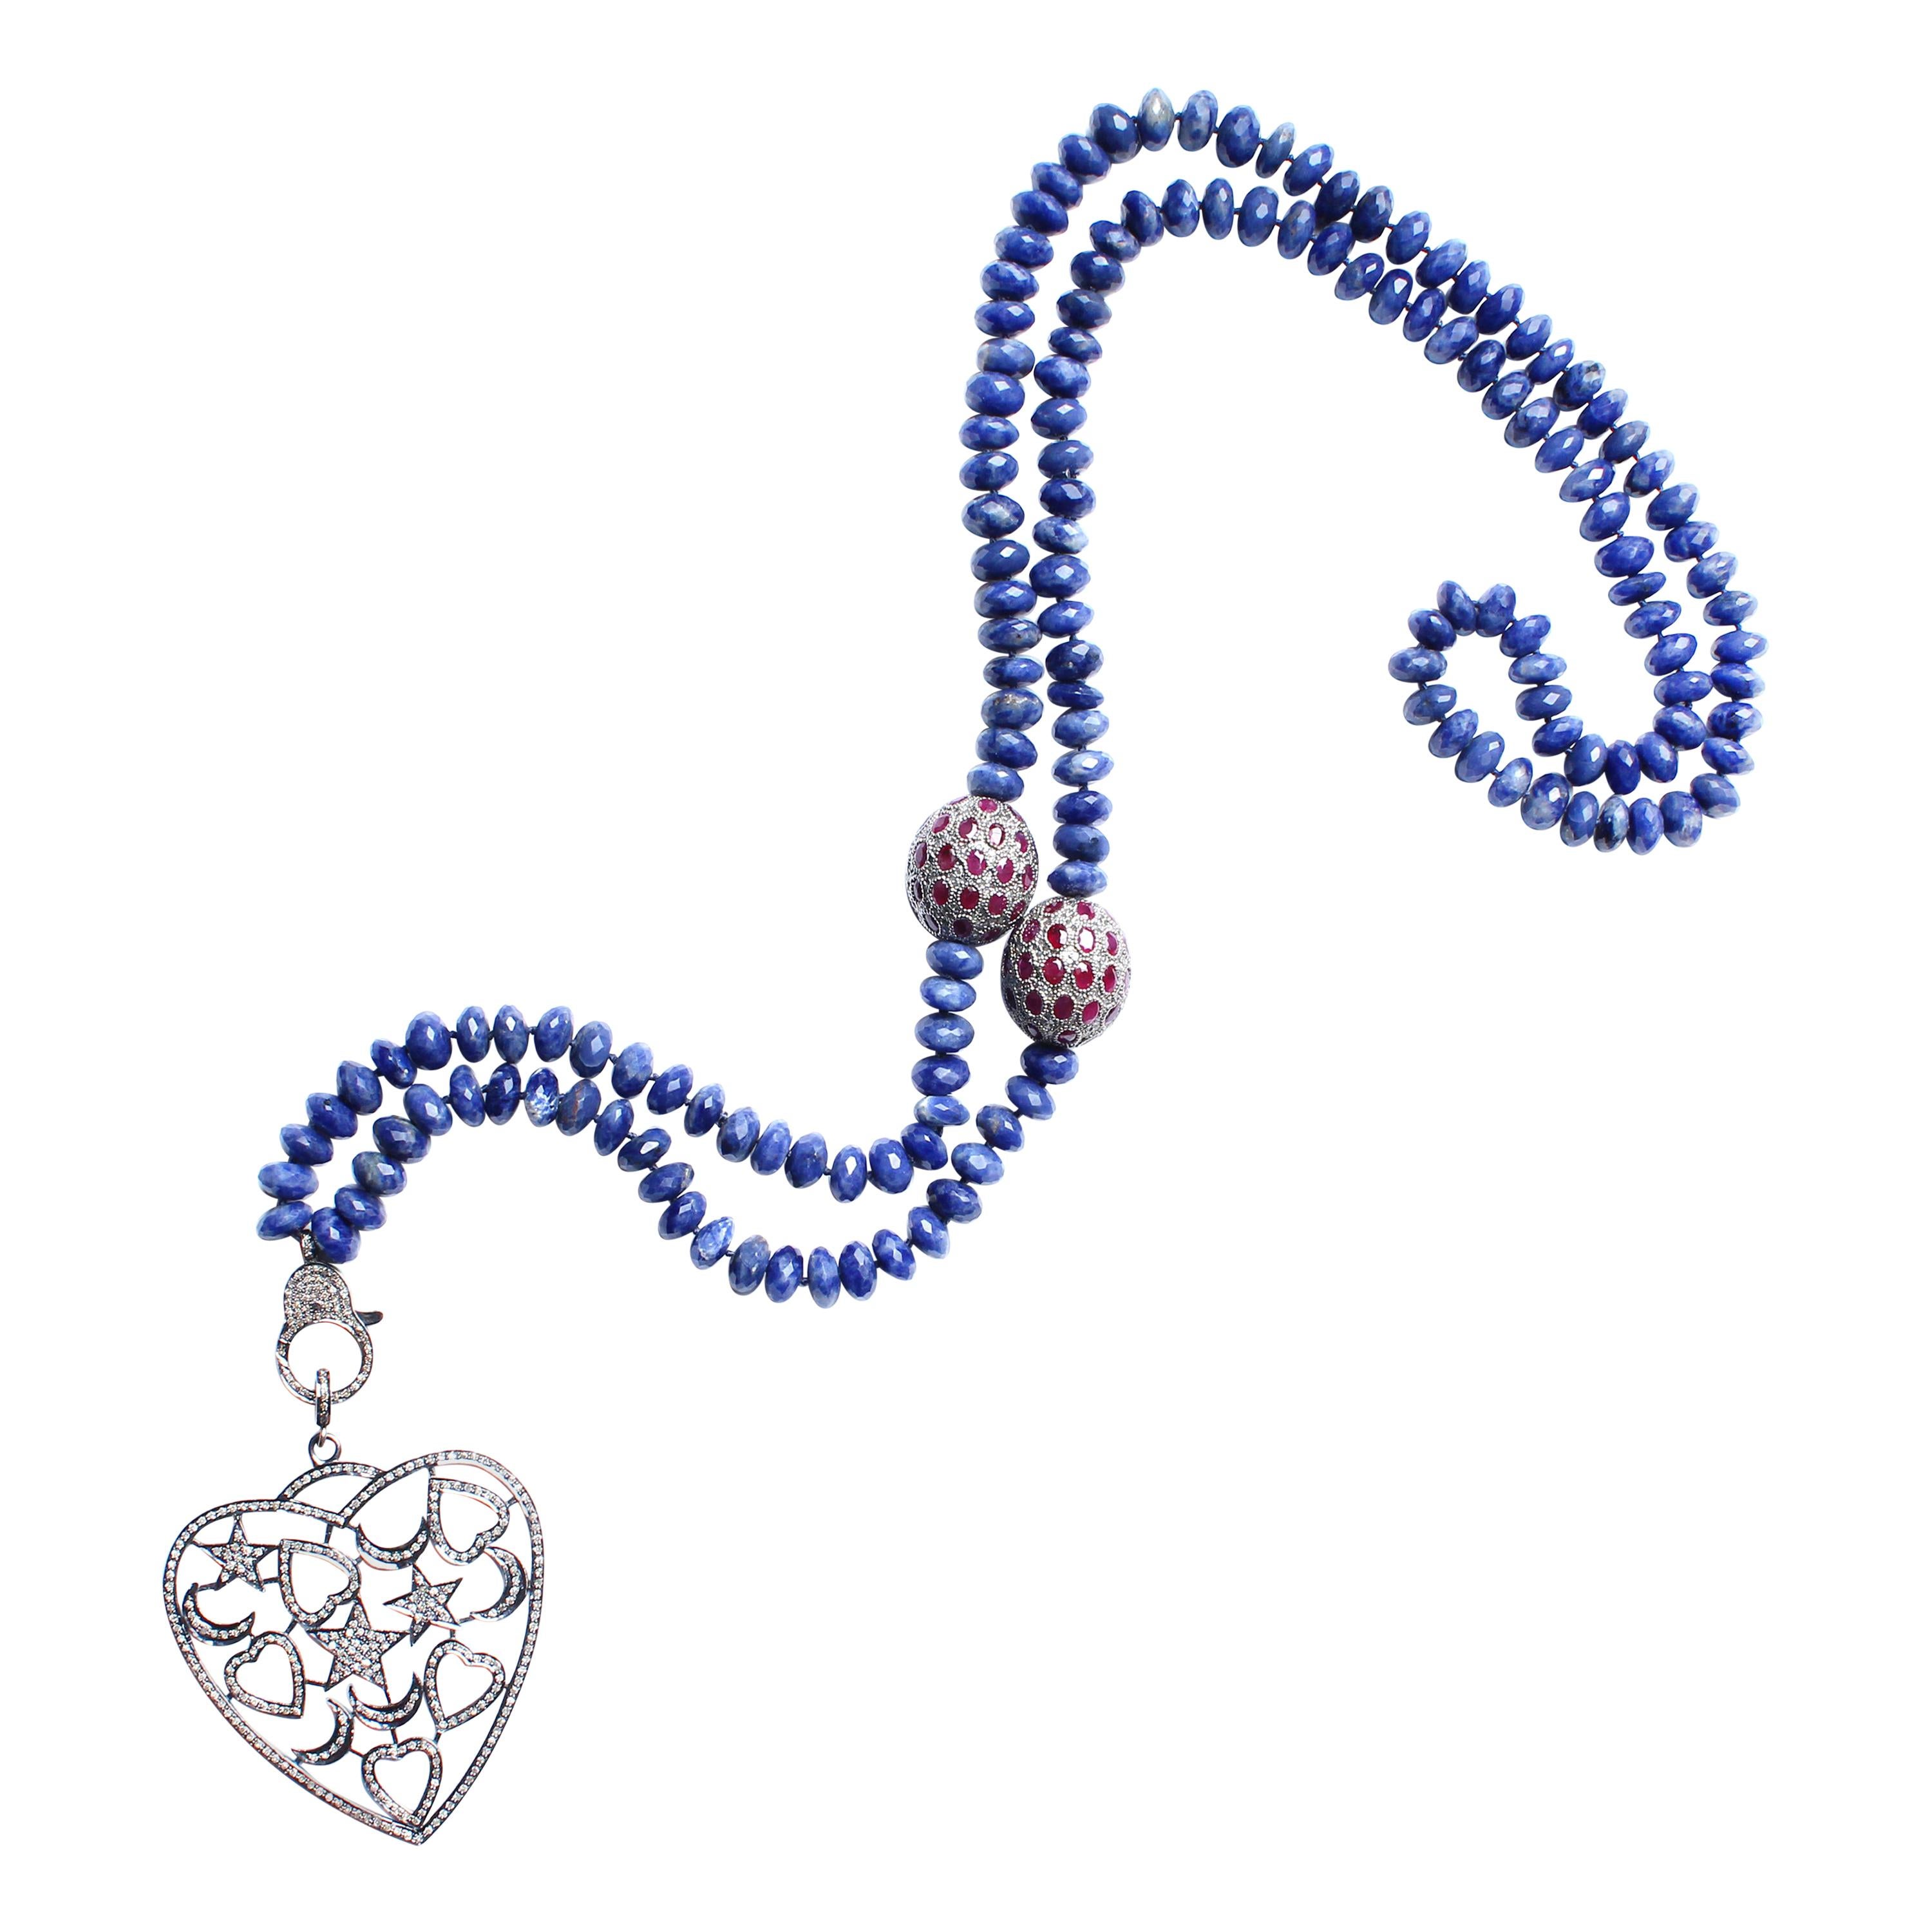 Clarissa Bronfman Lapis Beaded Ruby Diamond and Silver Heart Pendant Necklace